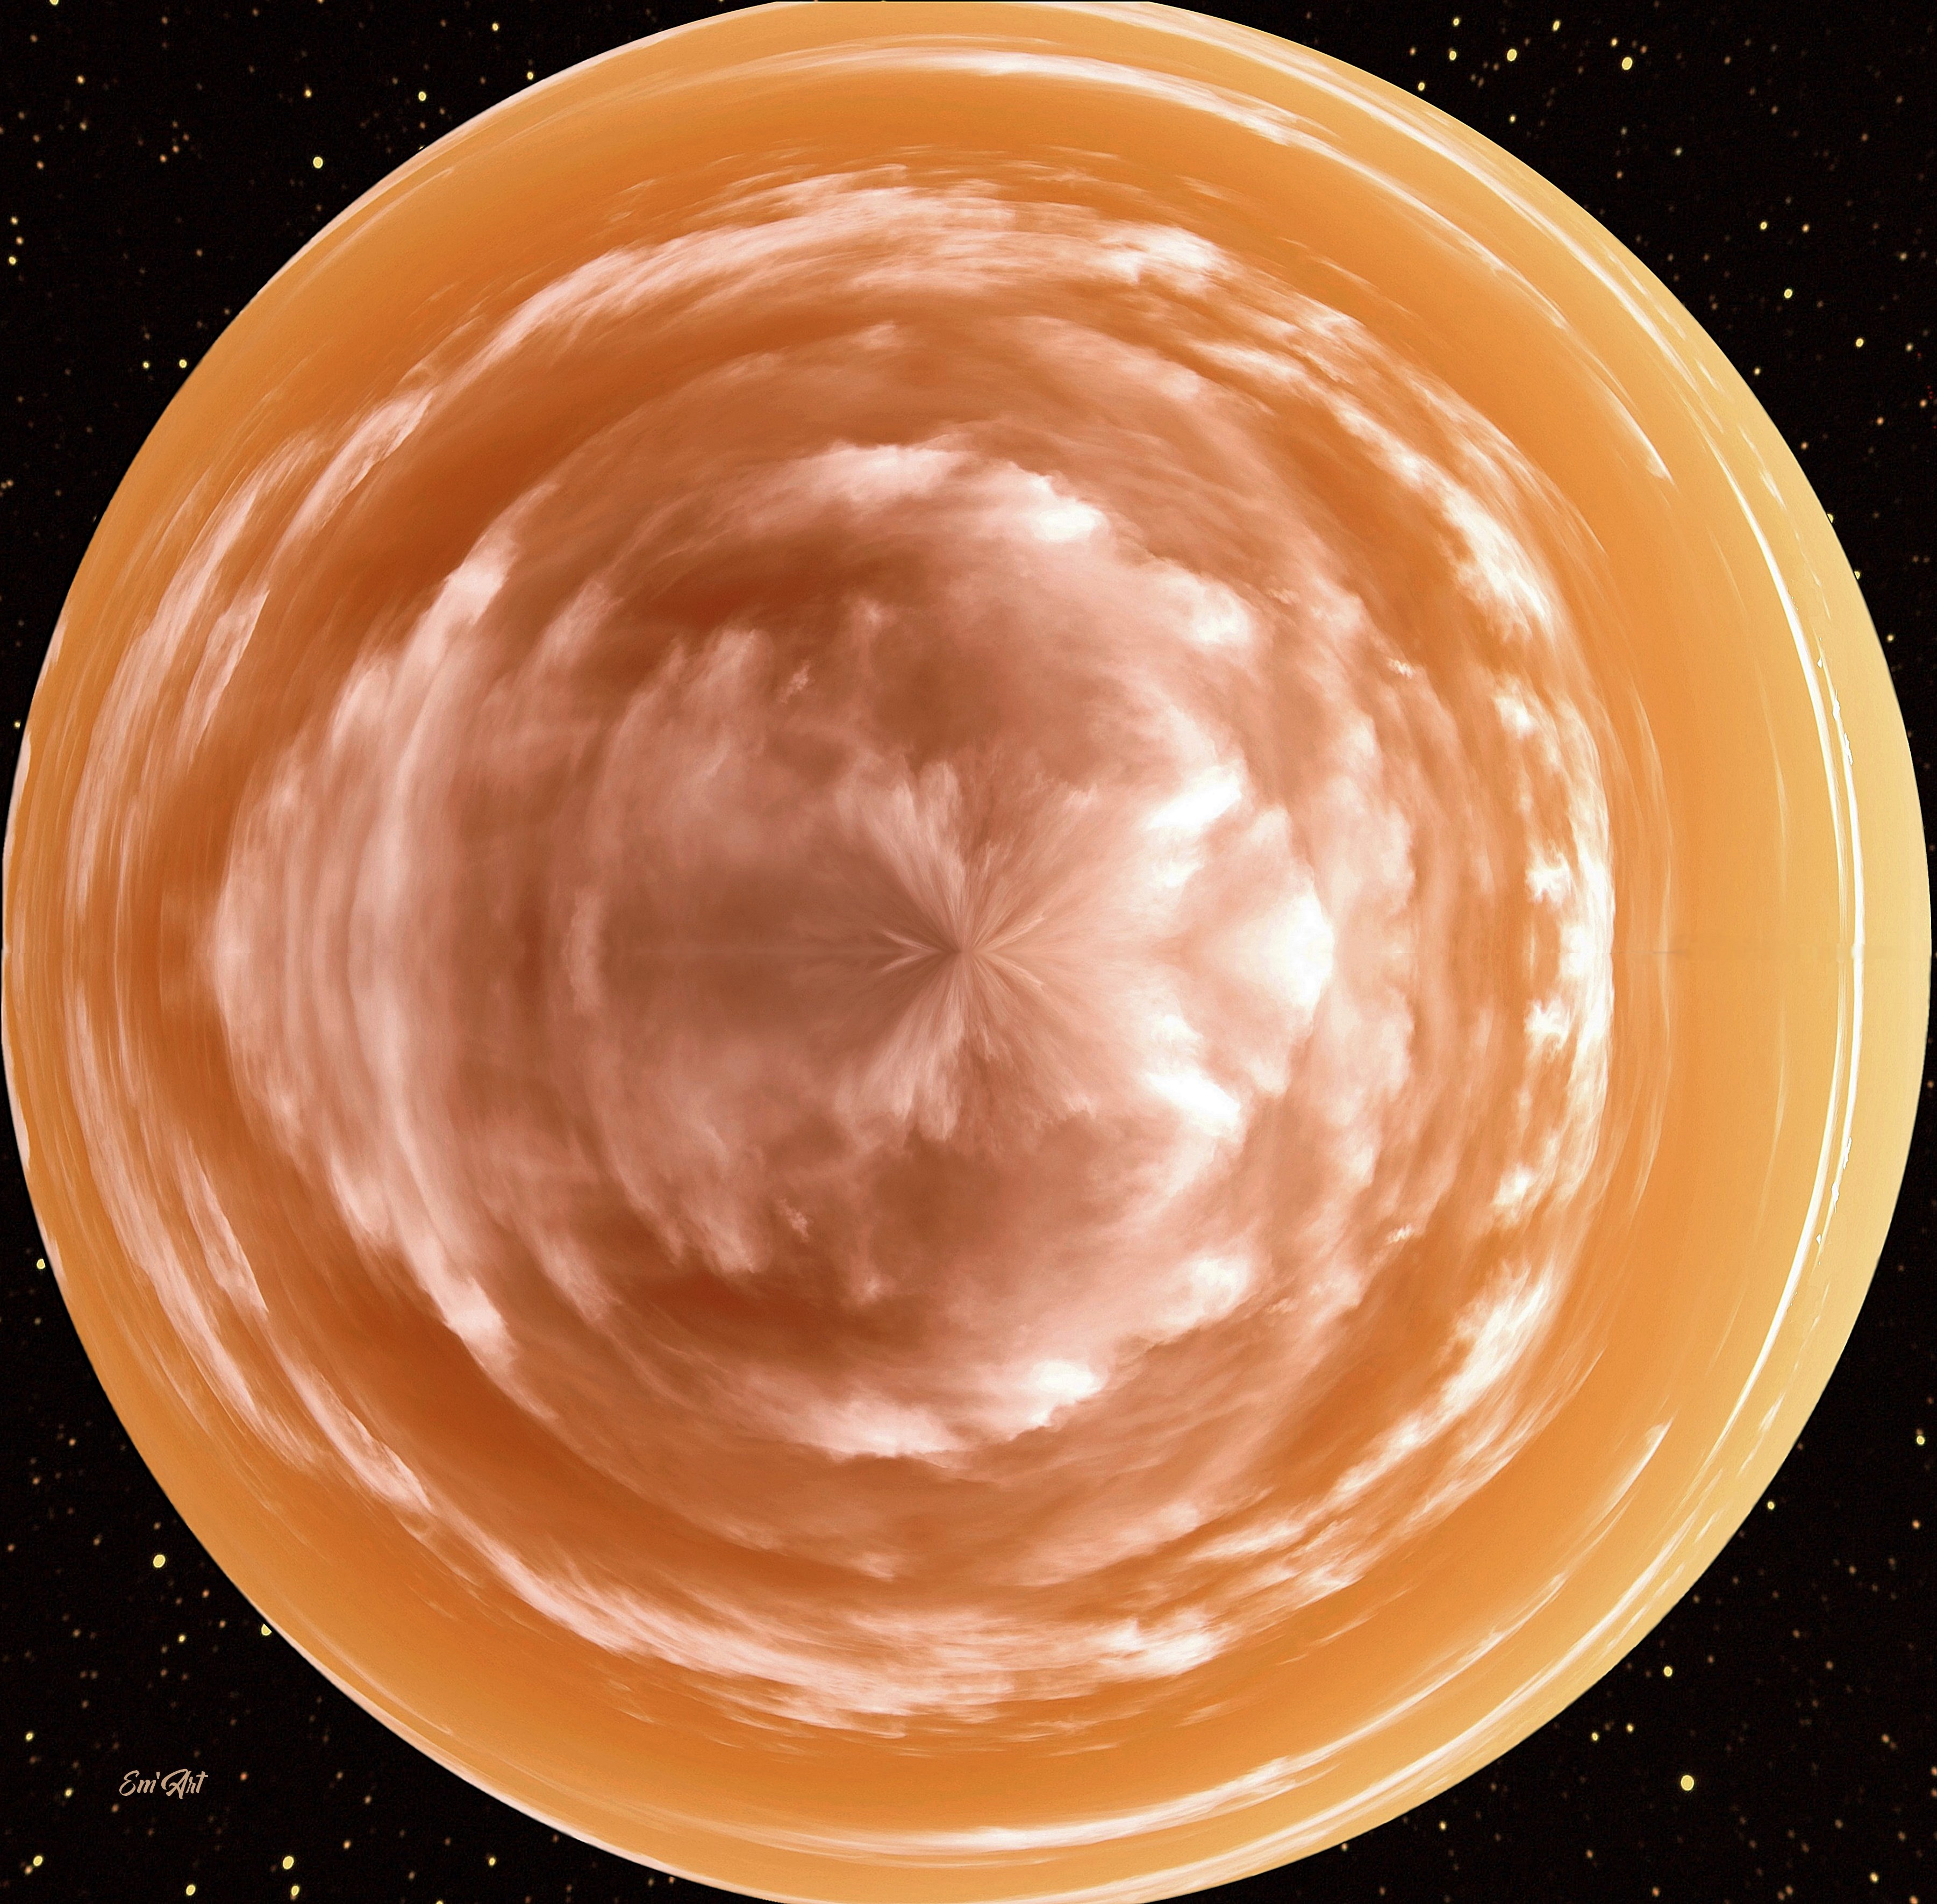 As a polar view of Mars planet